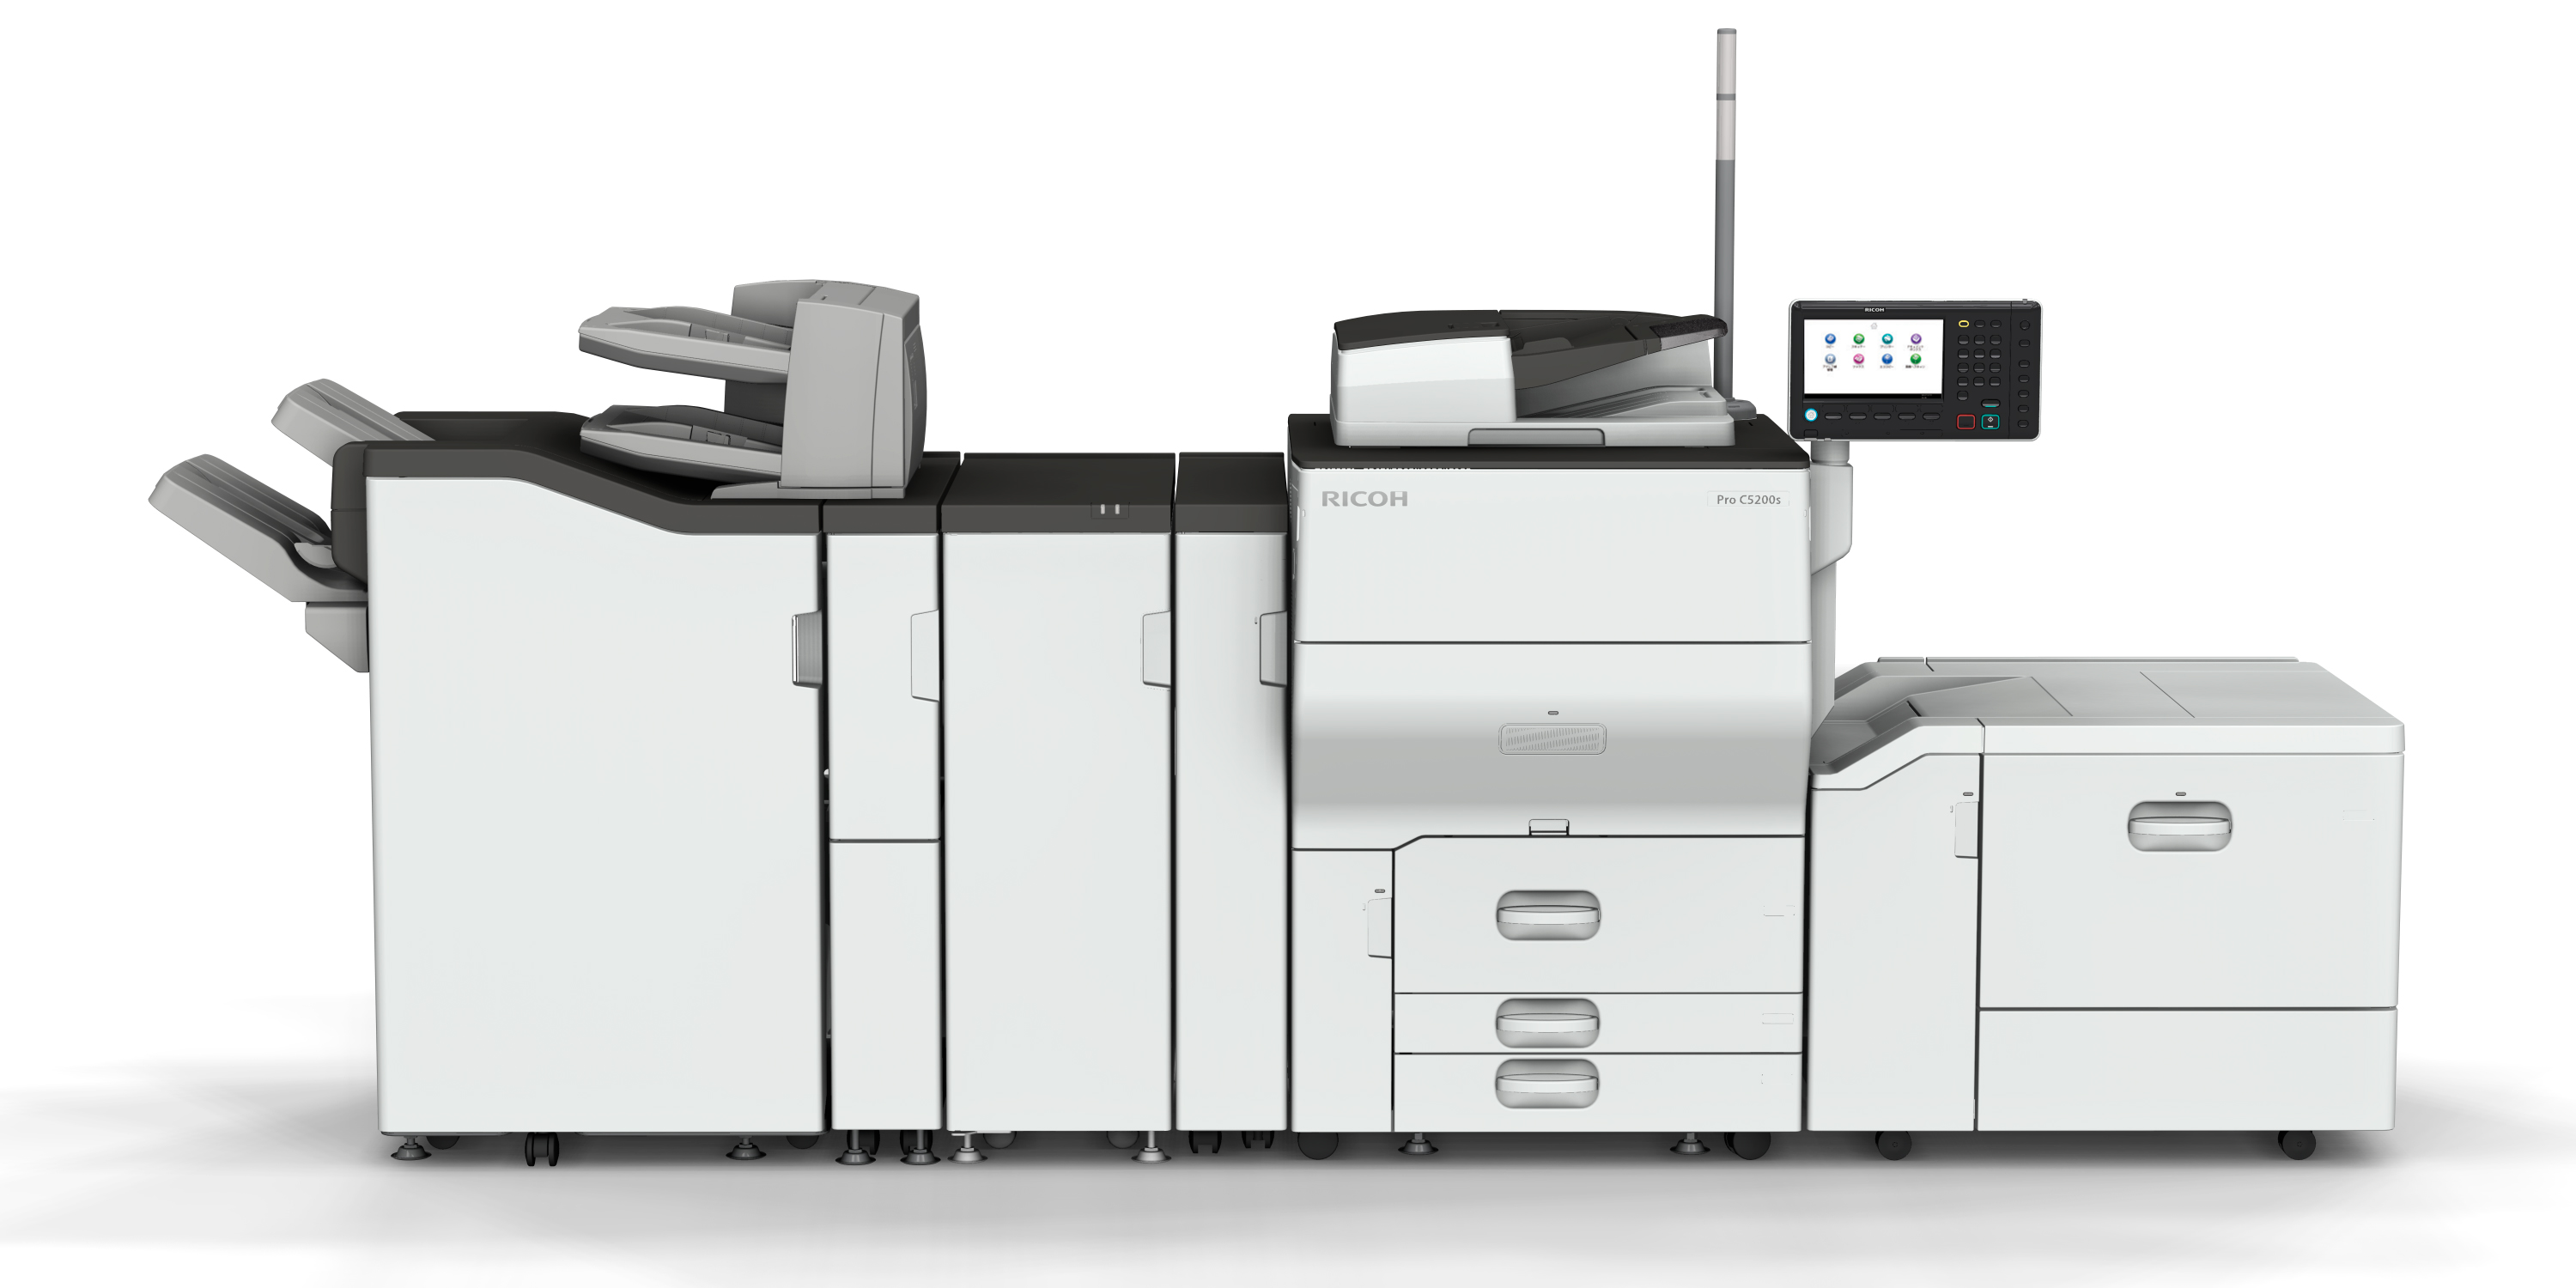 Ricoh’s digital book printing solution and Ricoh Pro™ C5200 series receive EDP endorsement